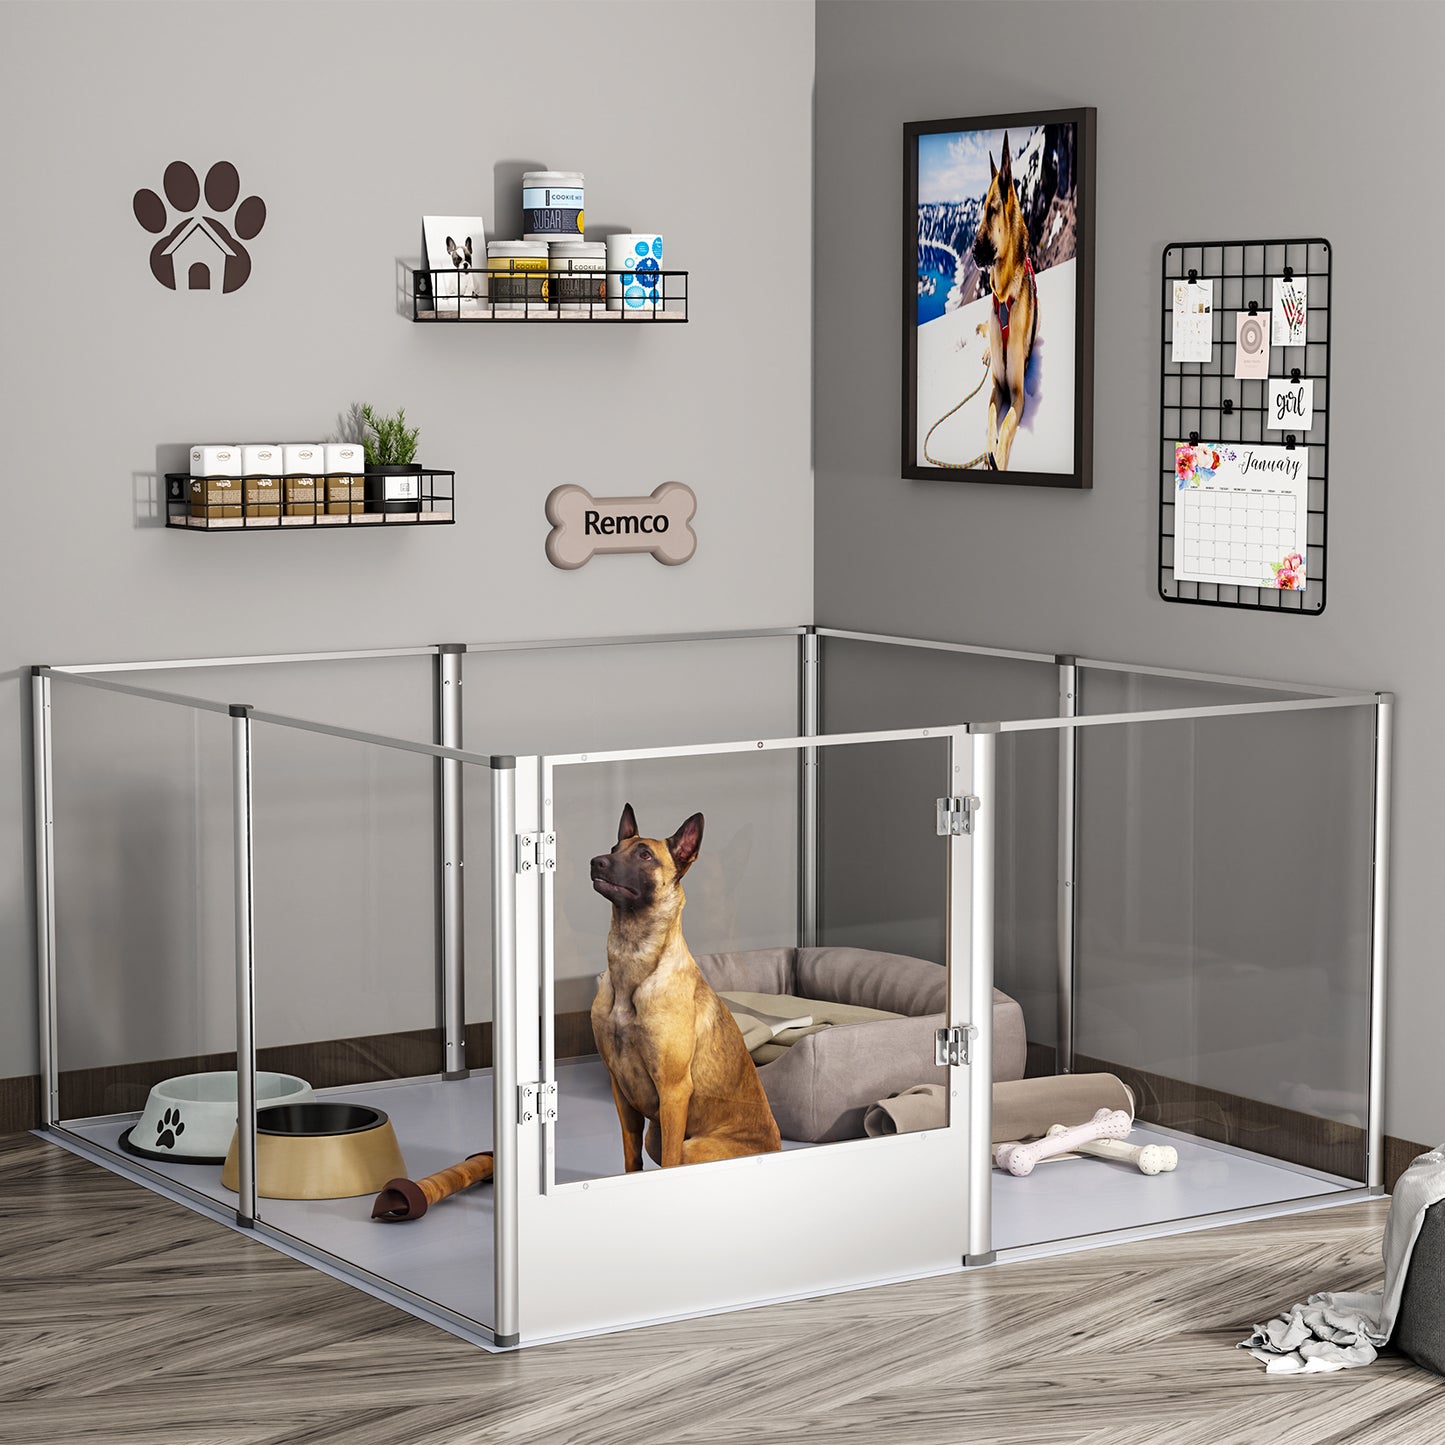 Acrylic Dog Playpen Fence: Indoor Pet Whelping Pen Box Dog Playpen Kennel 80.5cm Taller with Waterproof Fertility Pad for Puppies, Rabbits, Guinea Pig